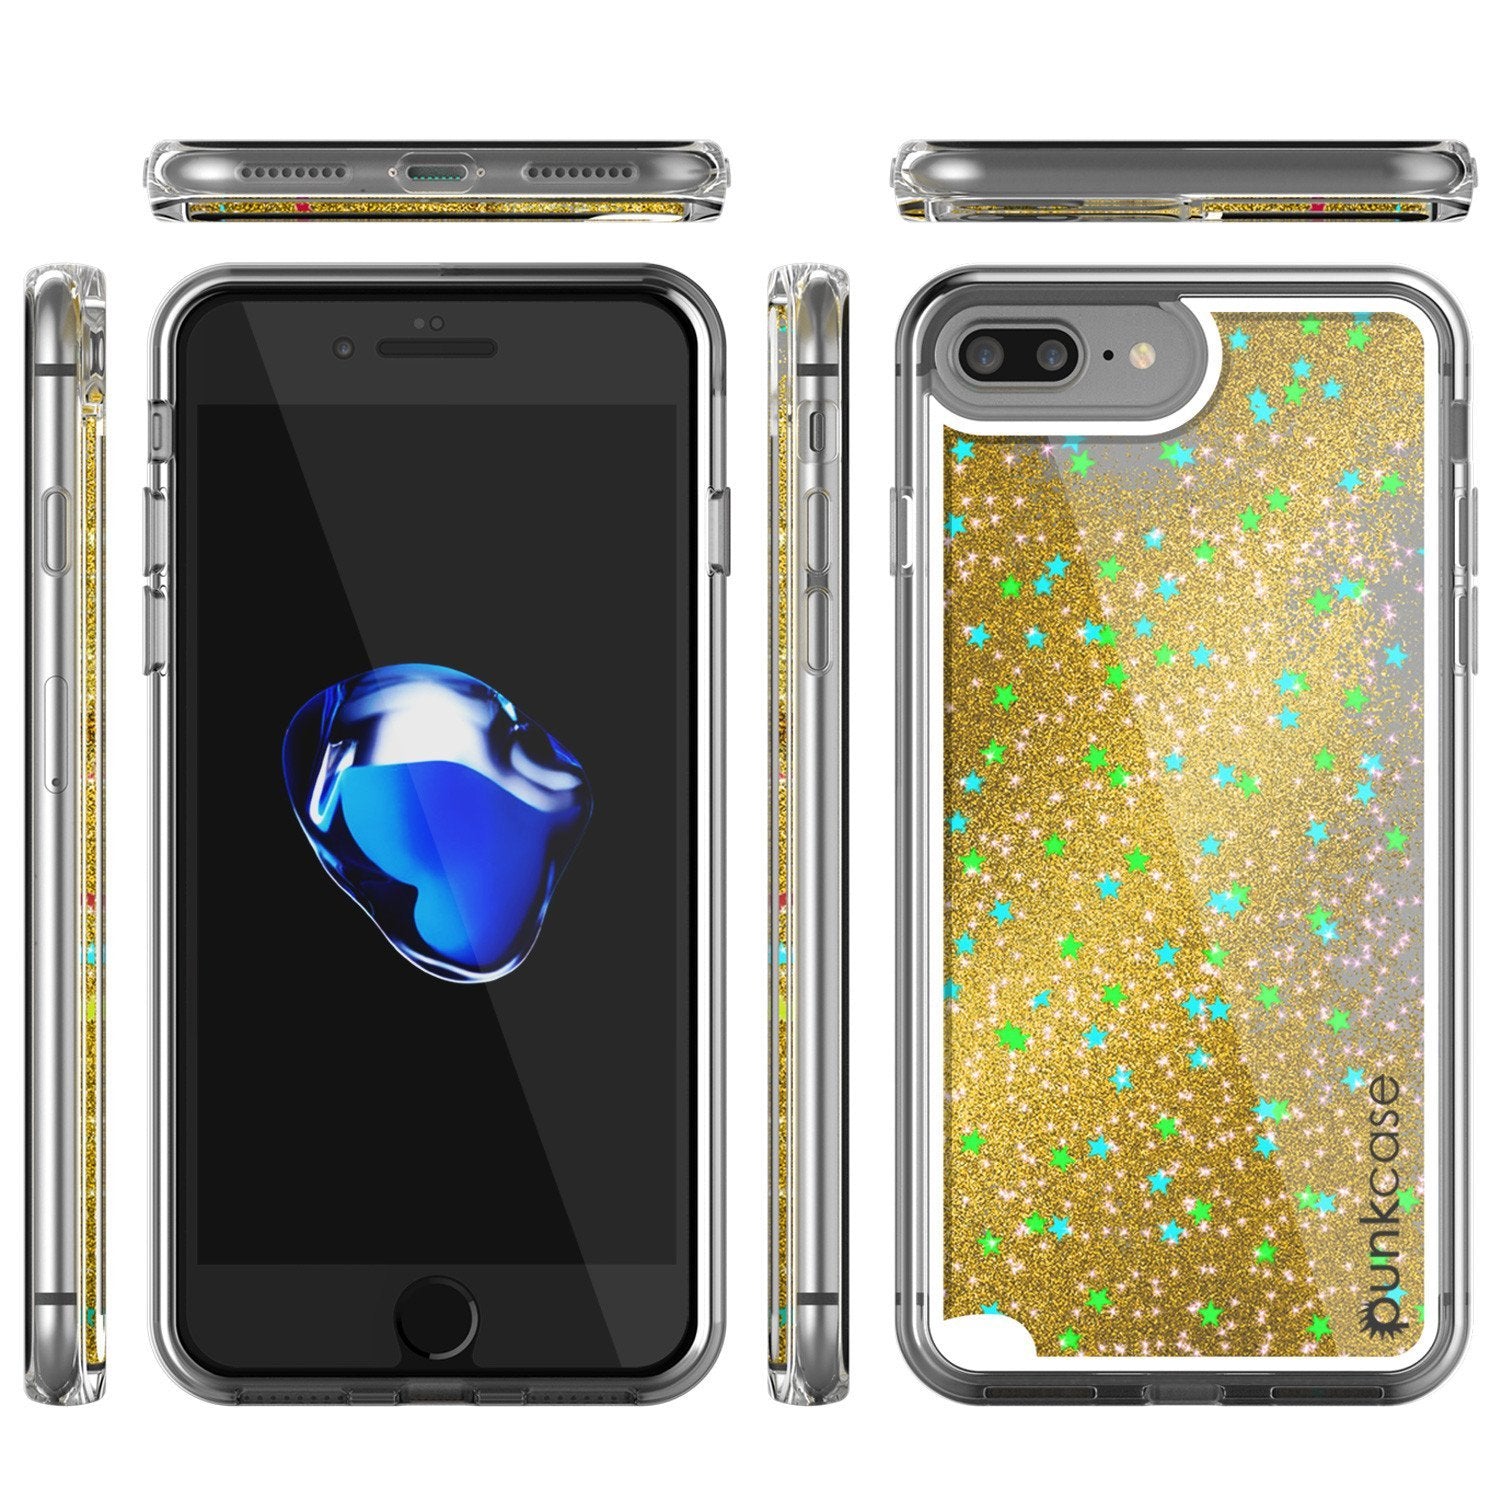 iPhone 8+ Plus Case, PunkСase LIQUID Gold Series, Protective Dual Layer Floating Glitter Cover